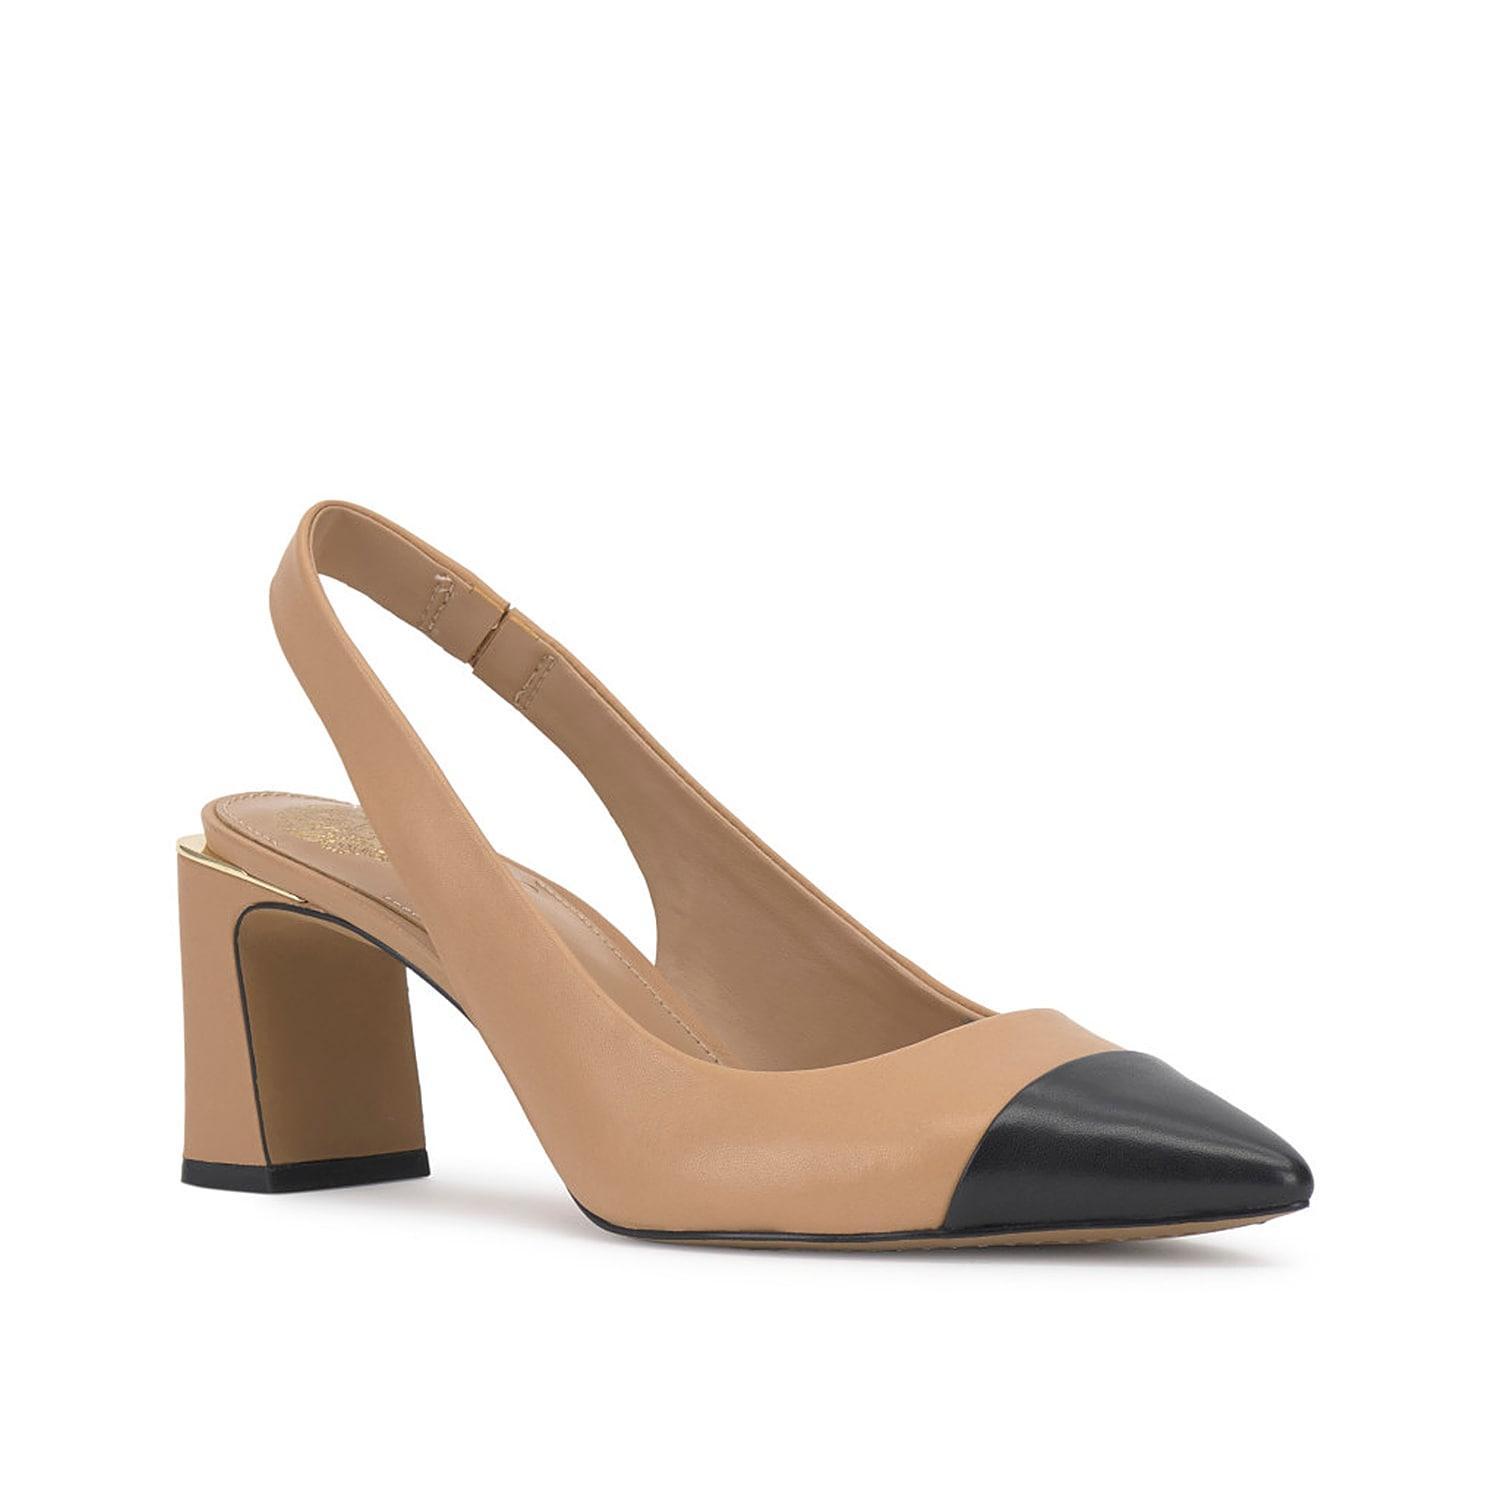 Vince Camuto Hamden Slingback Pointed Cap Toe Pump Product Image